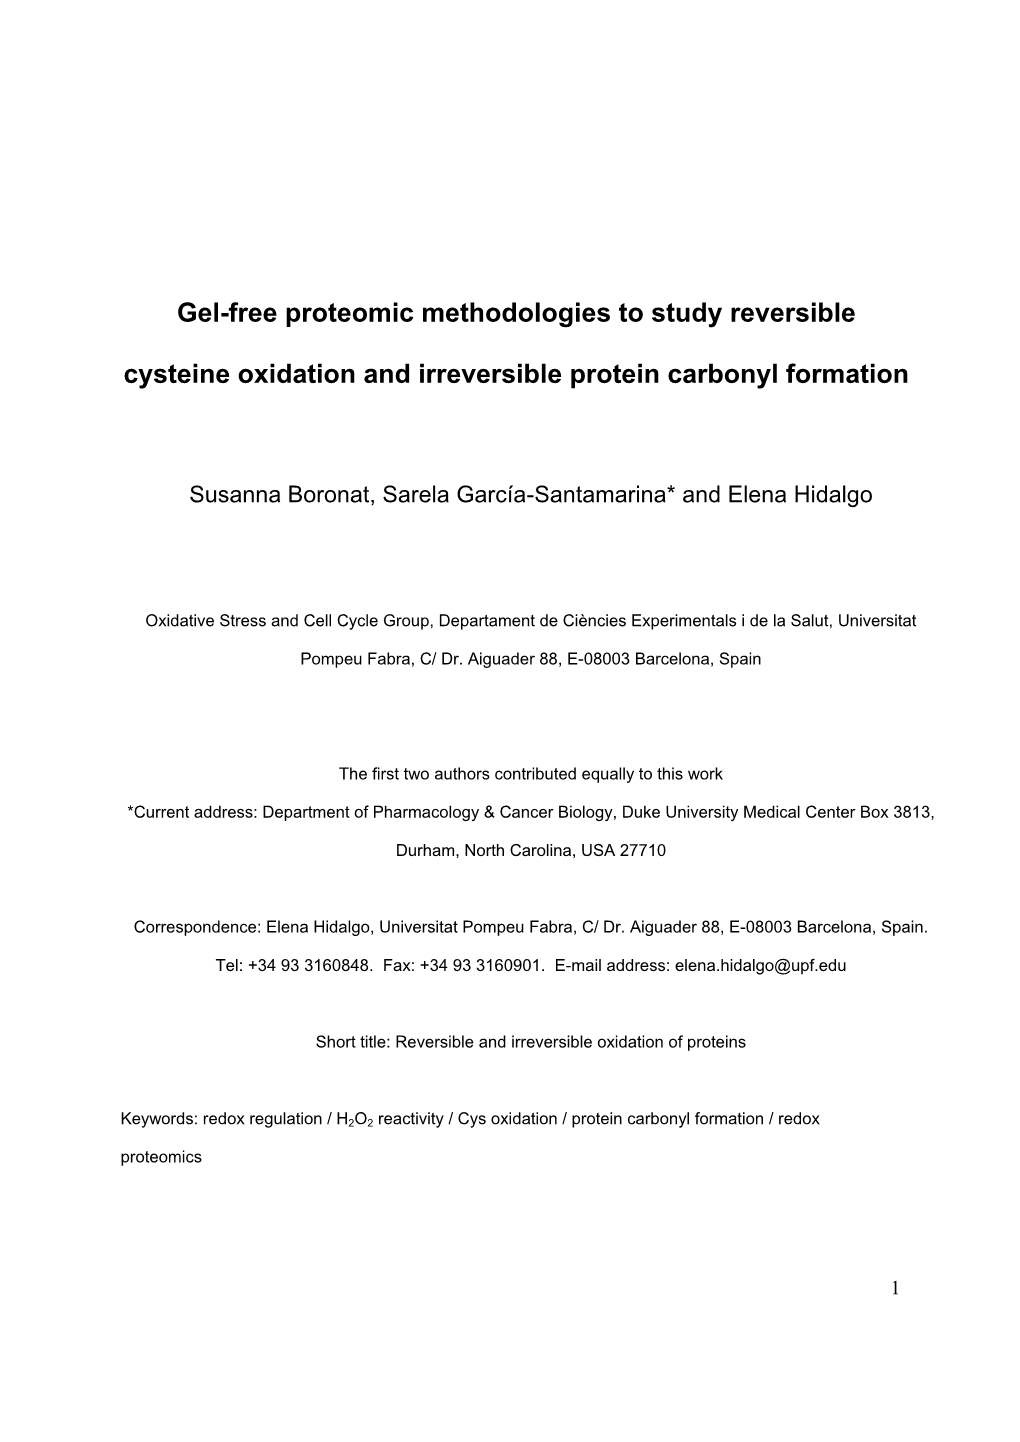 Gel-Free Proteomic Methodologies to Study Reversible Cysteine Oxidation and Irreversible Protein Carbonyl Formation